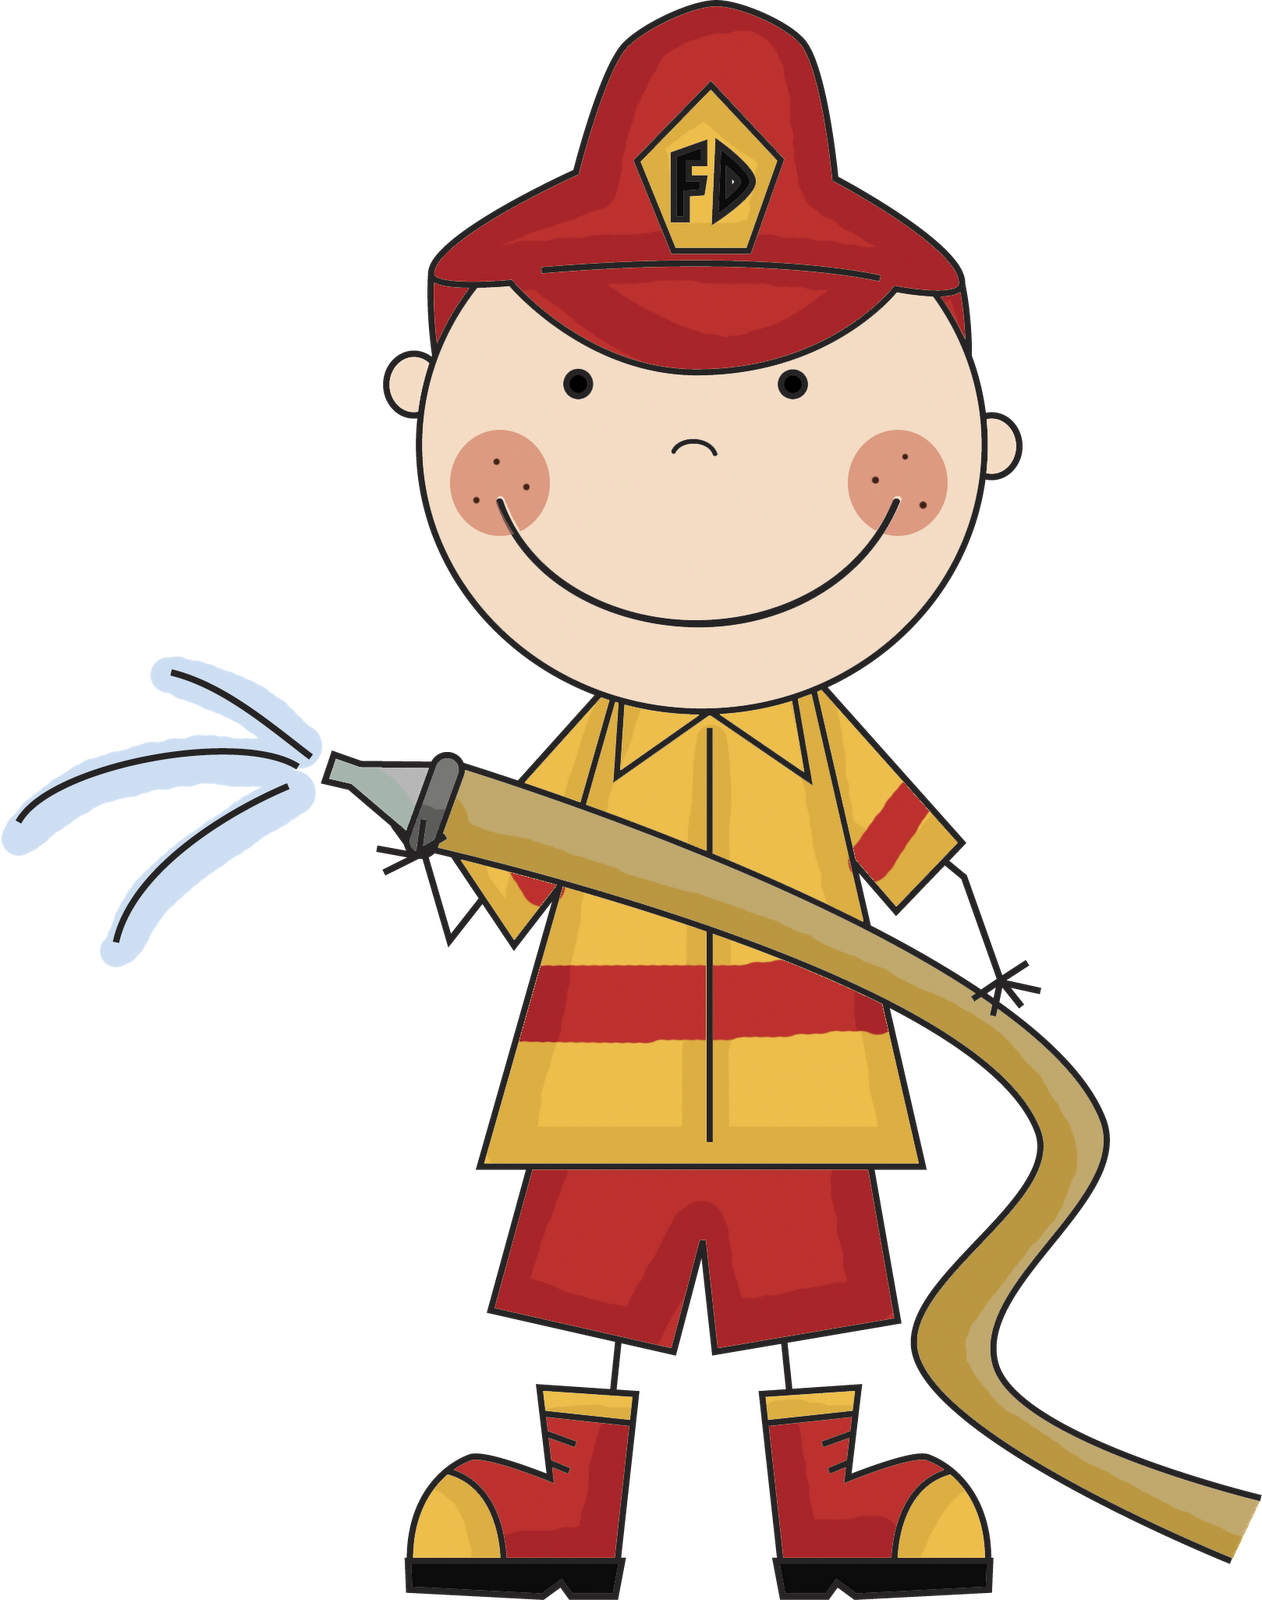 fire safety clipart - Fire Safety Clip Art